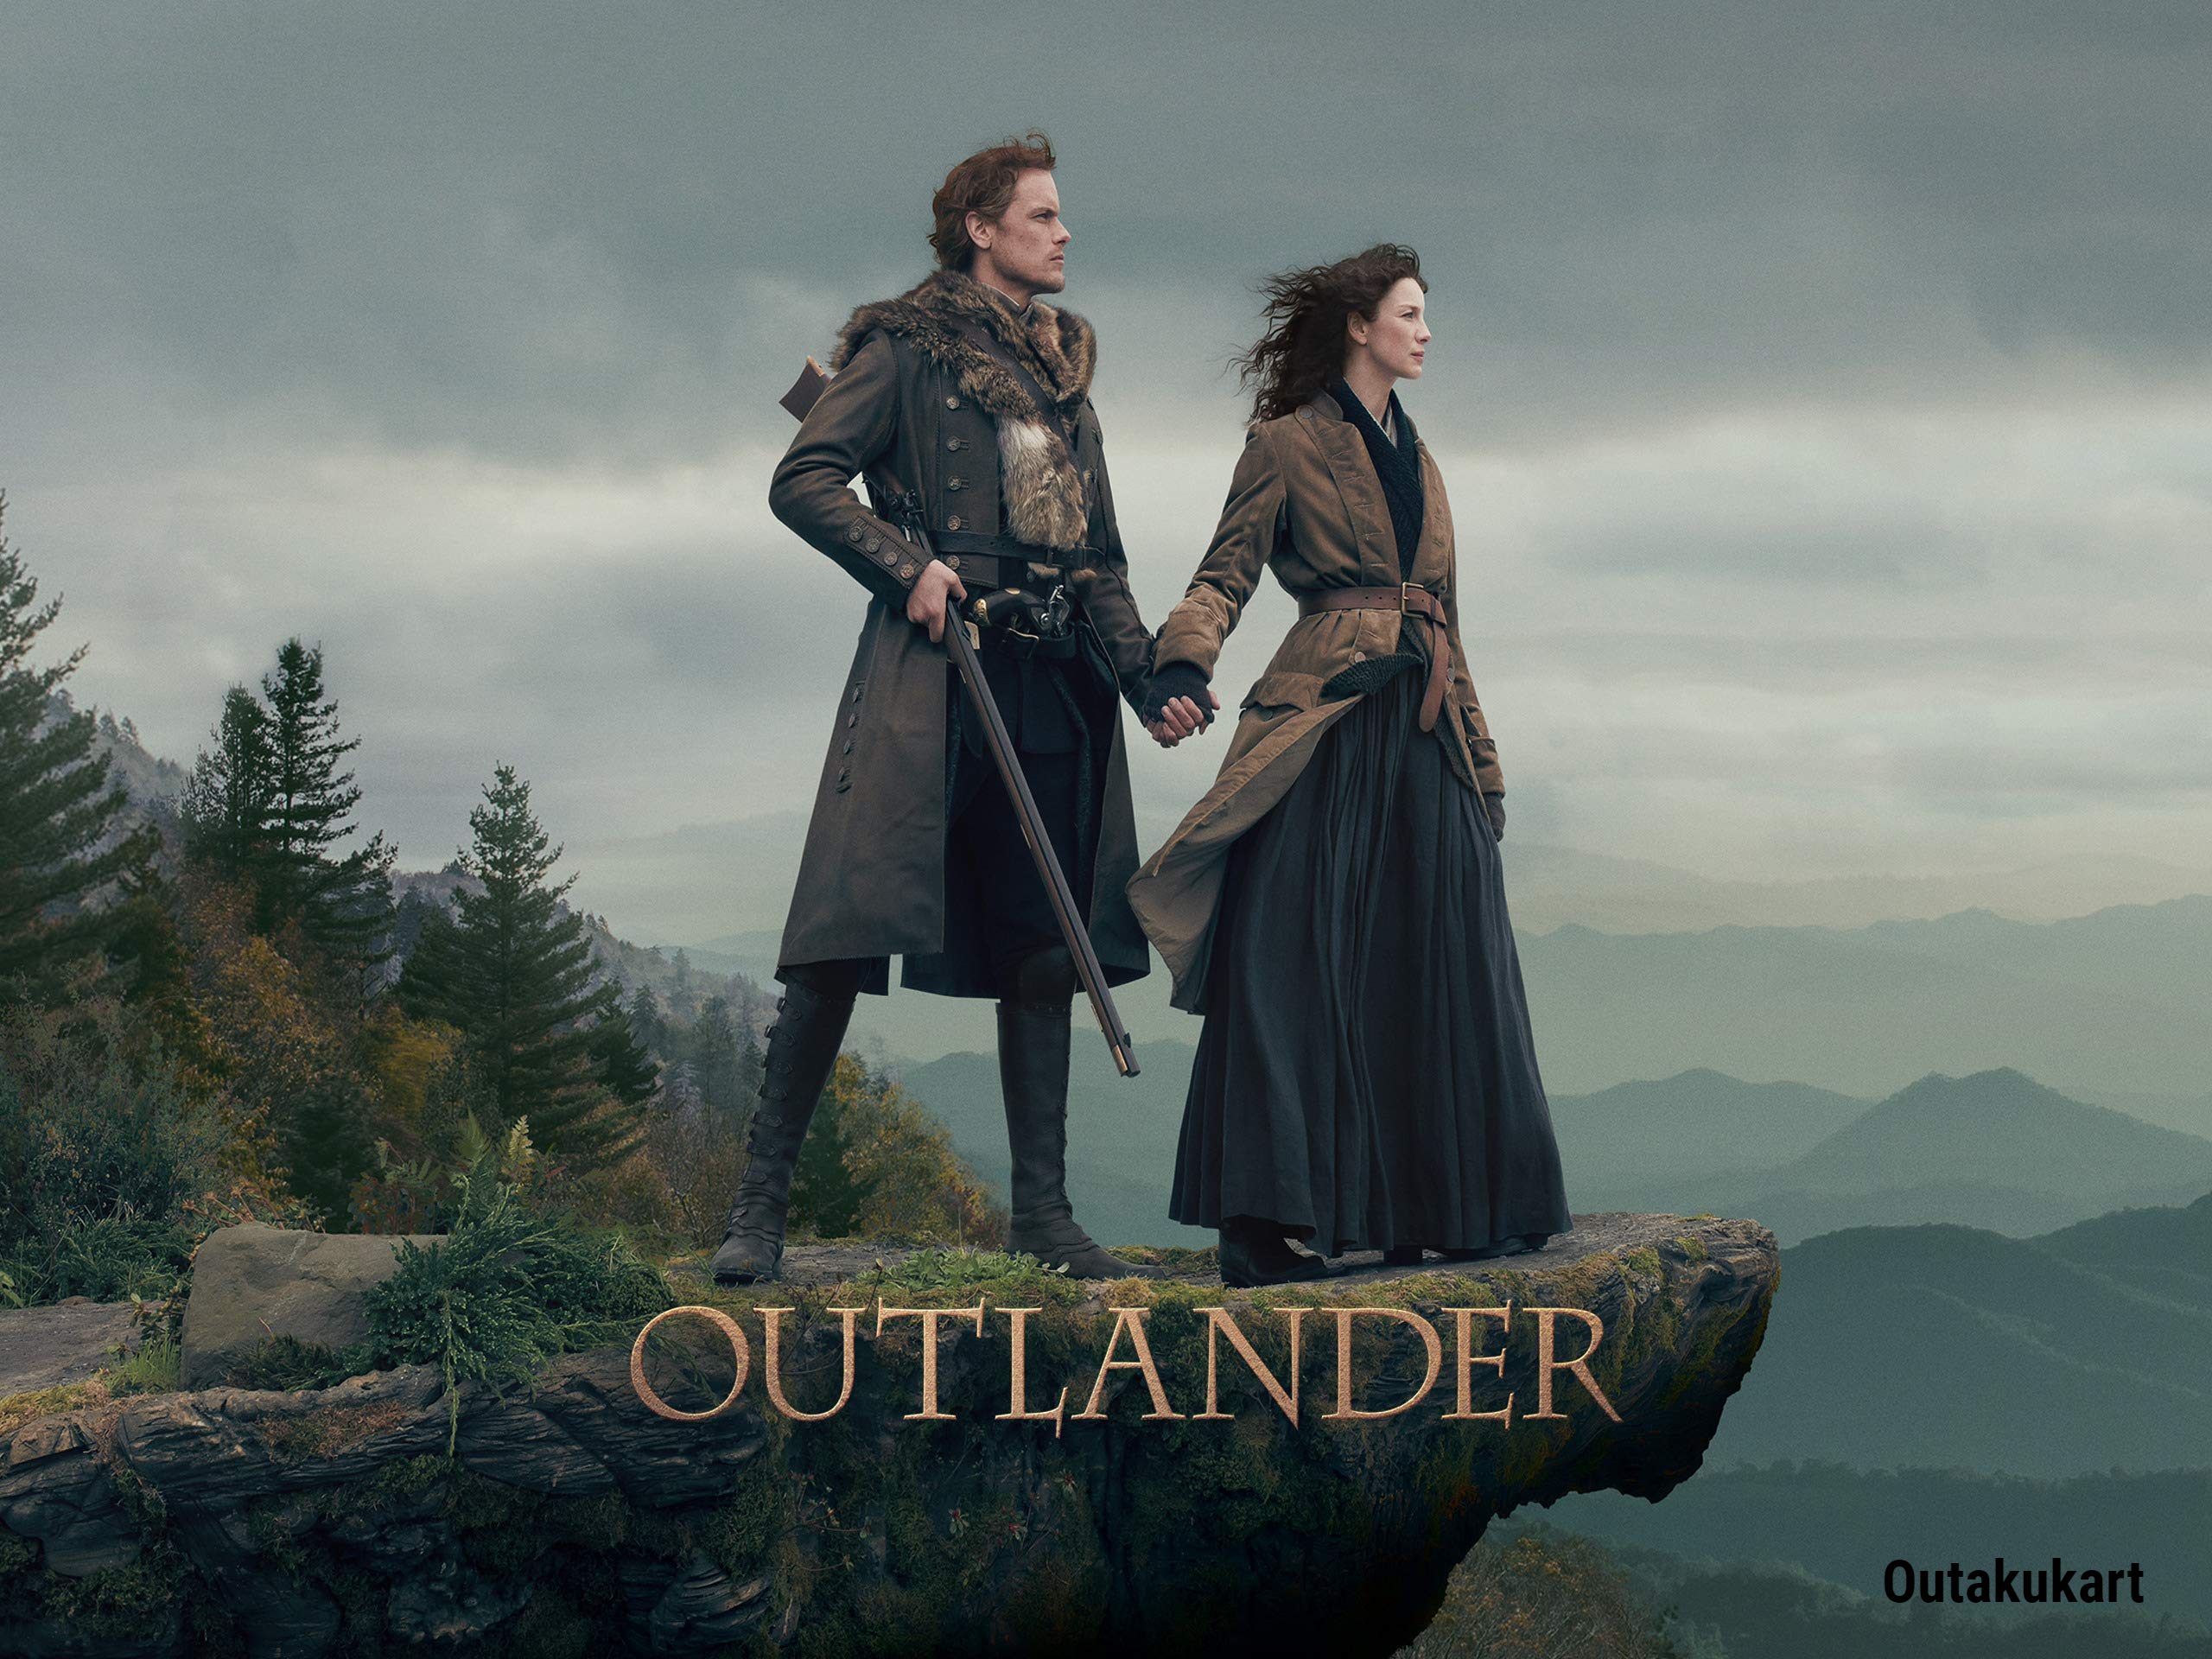 Is Outlander Available On Netflix In USA Or UK?